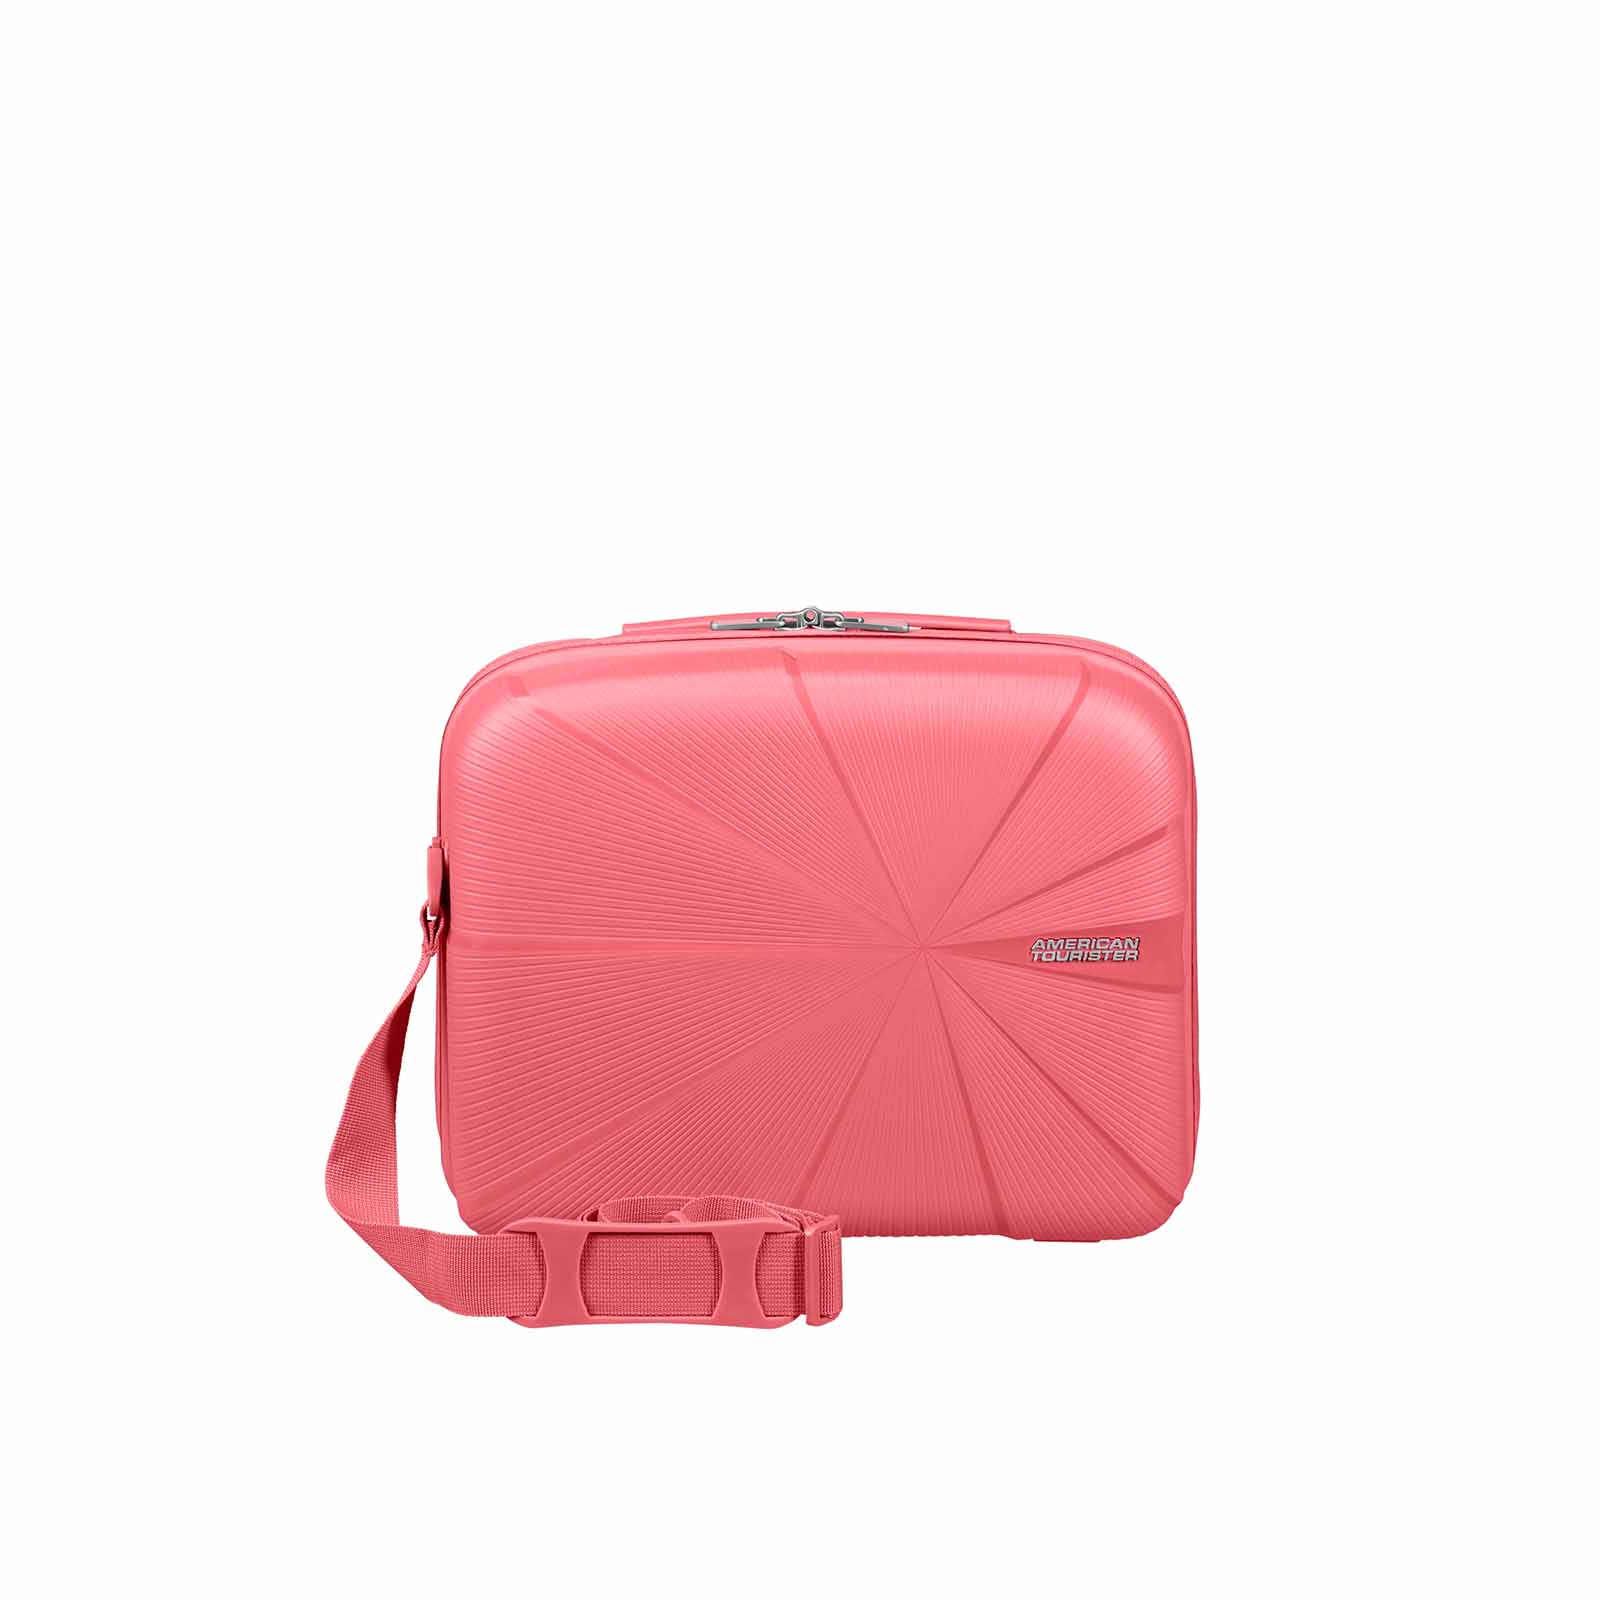 American-Tourister-Starvibe-Beauty-Case-Coral-Front